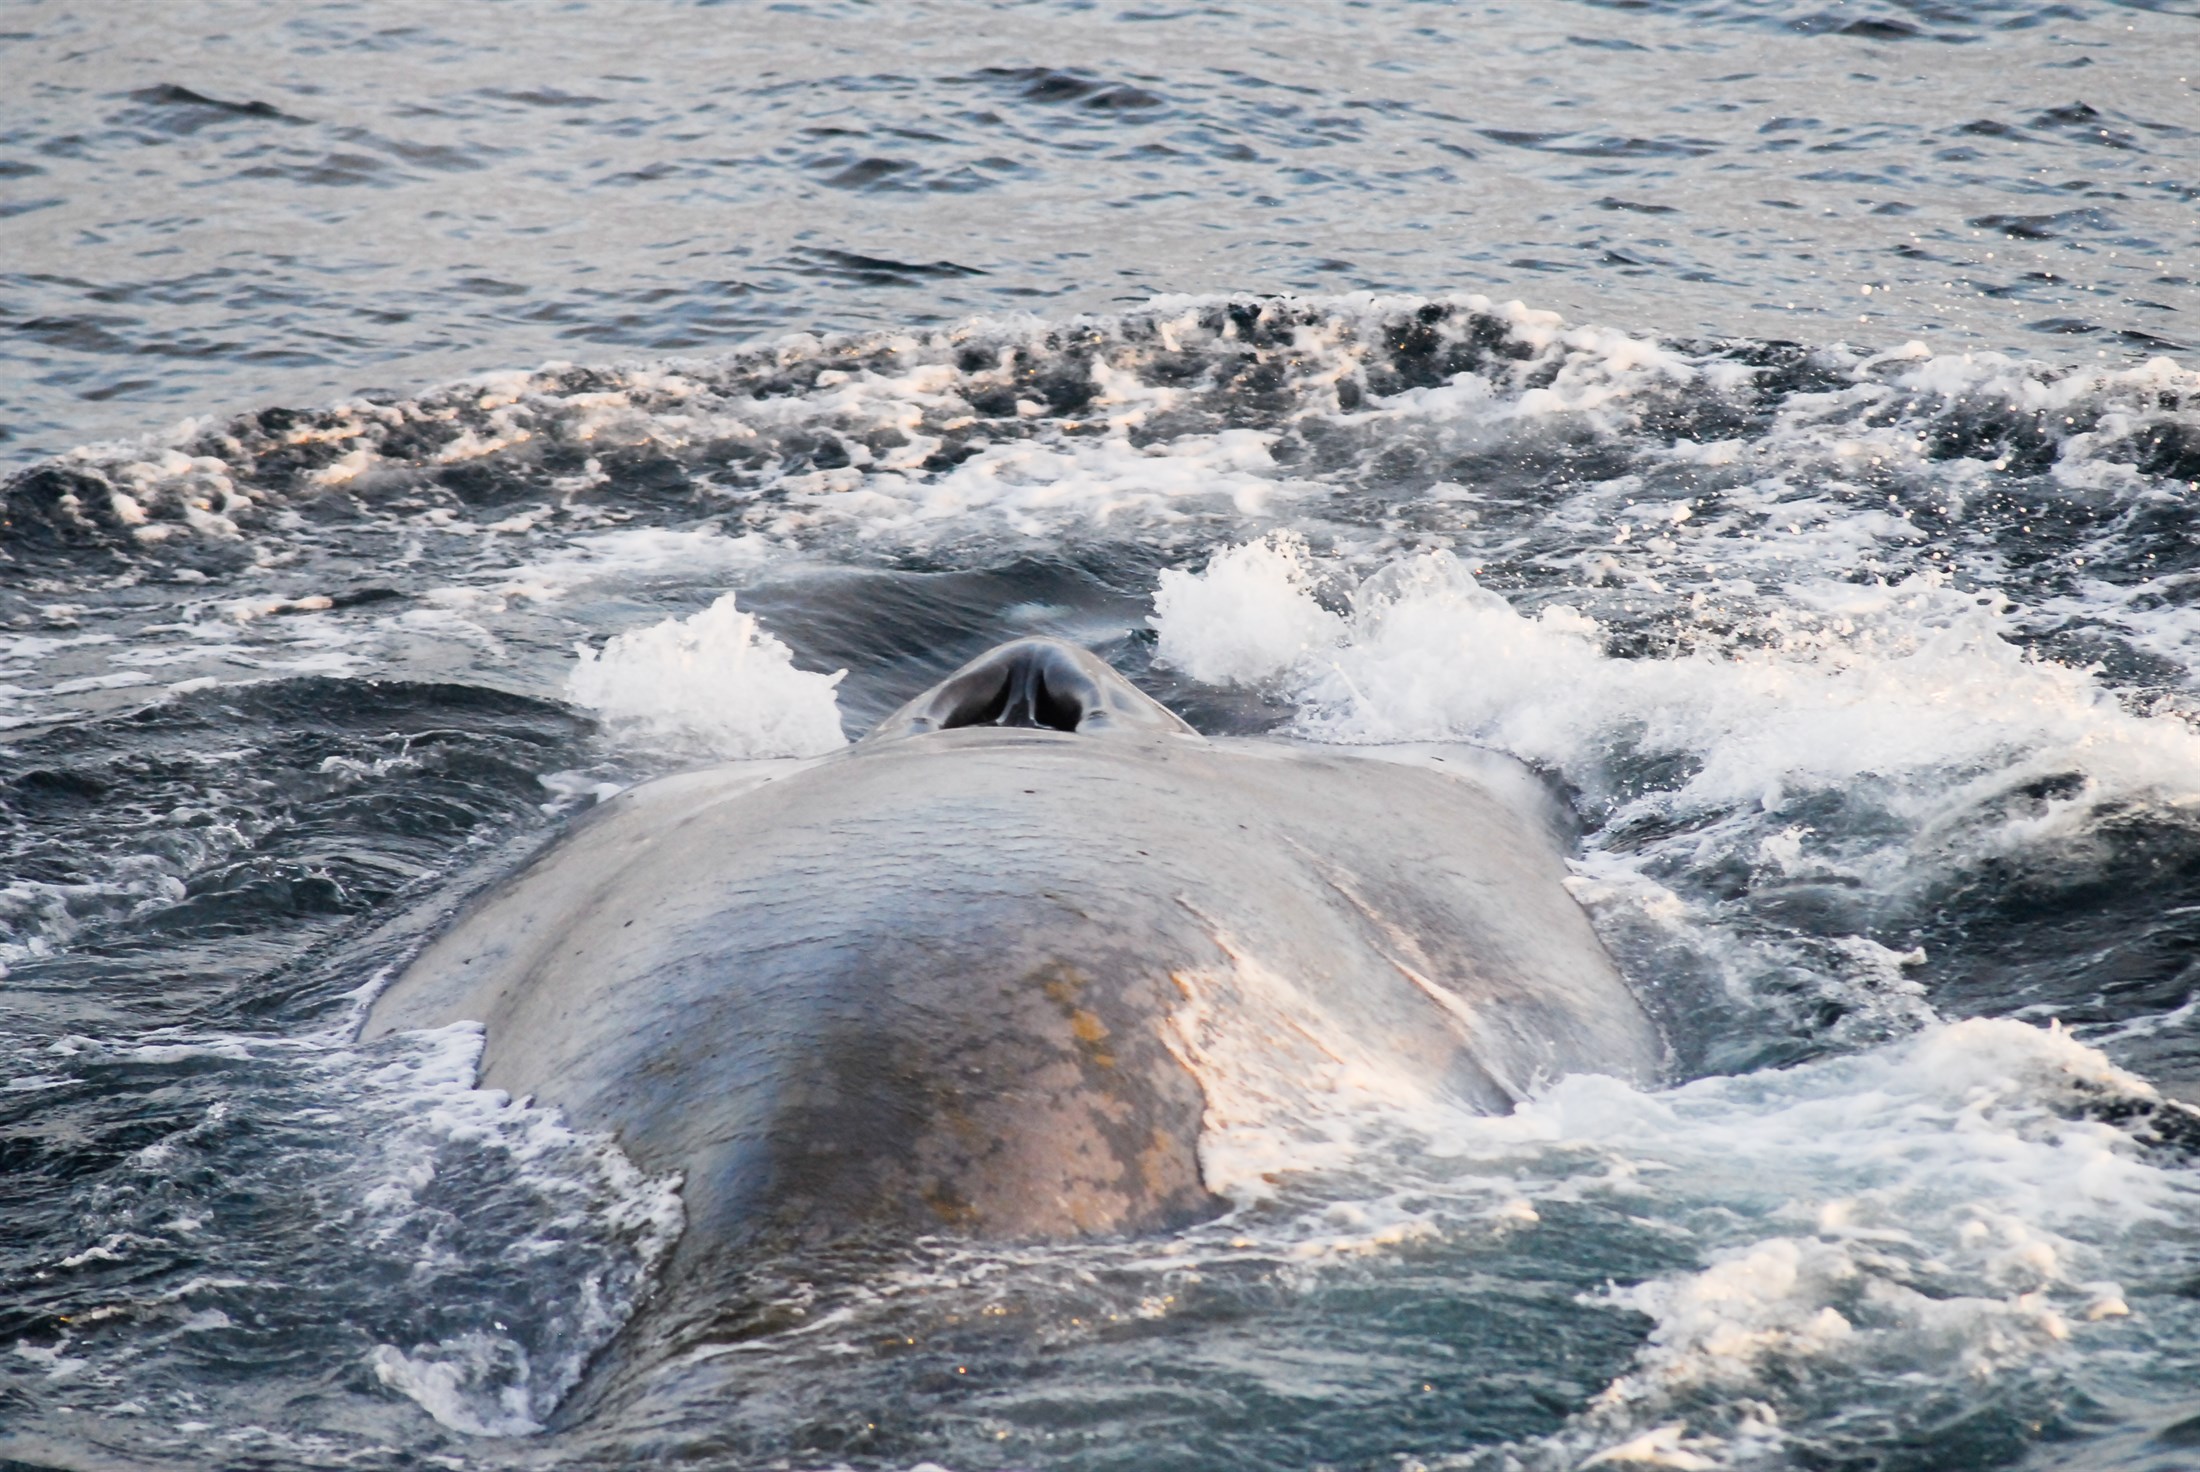 blue-whale-balaenoptera-musculus-svalbard_168d-2200x1472px